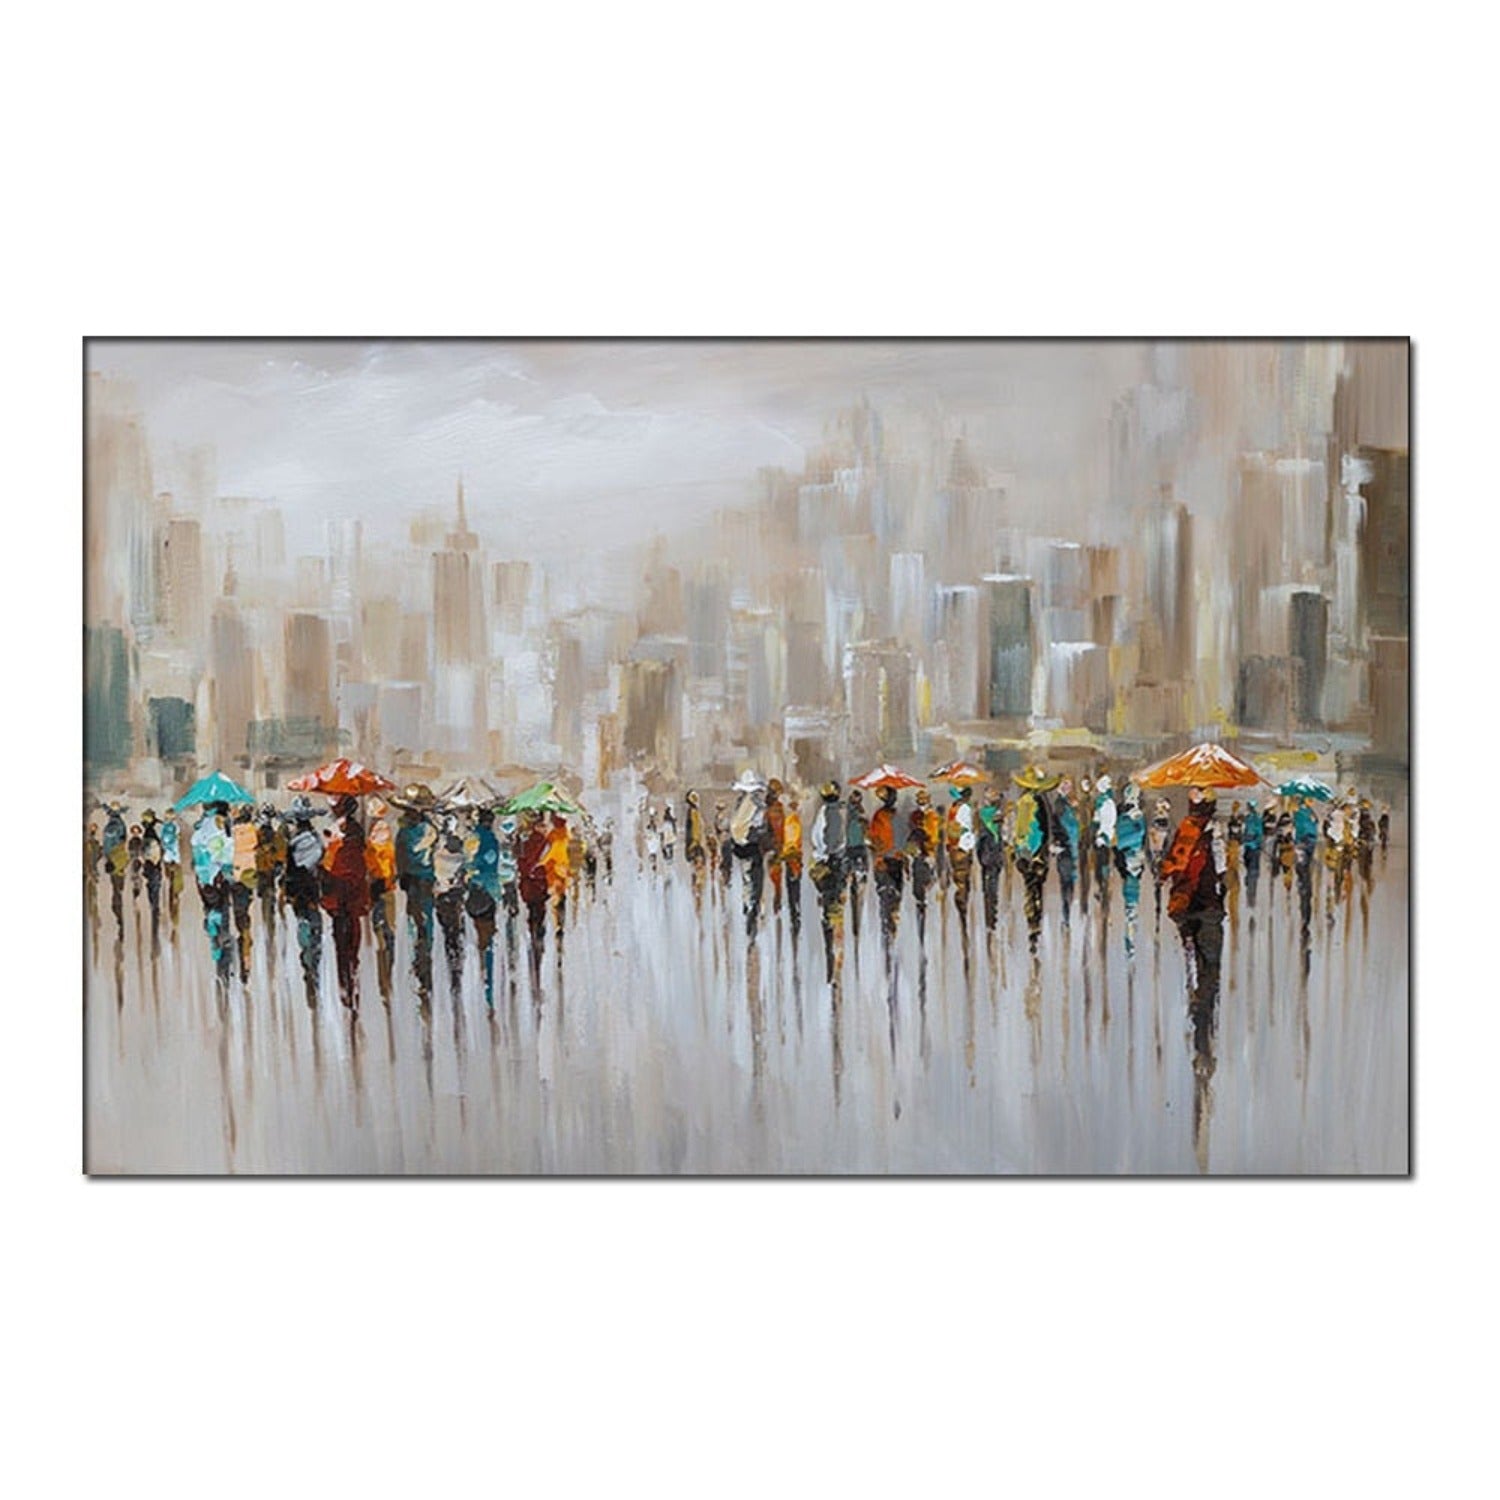 Textured Metropolis City Crowd View Abstract Art